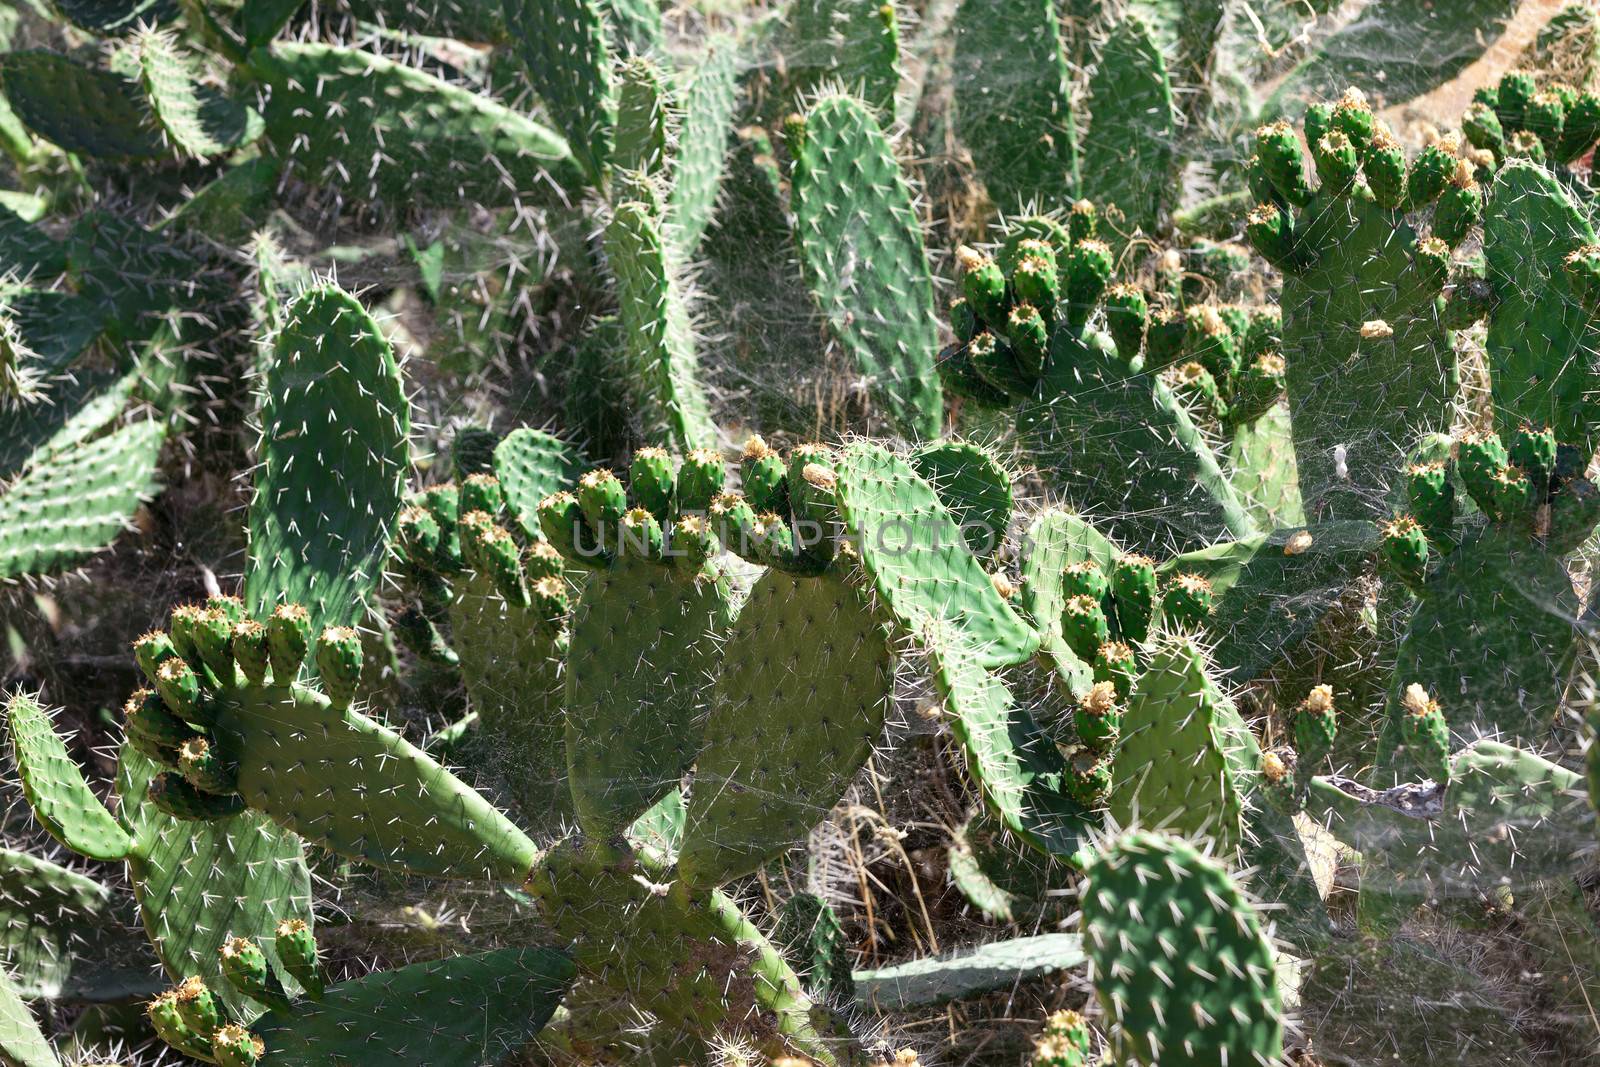 Bush green prickly cactus with spider web by Discovod